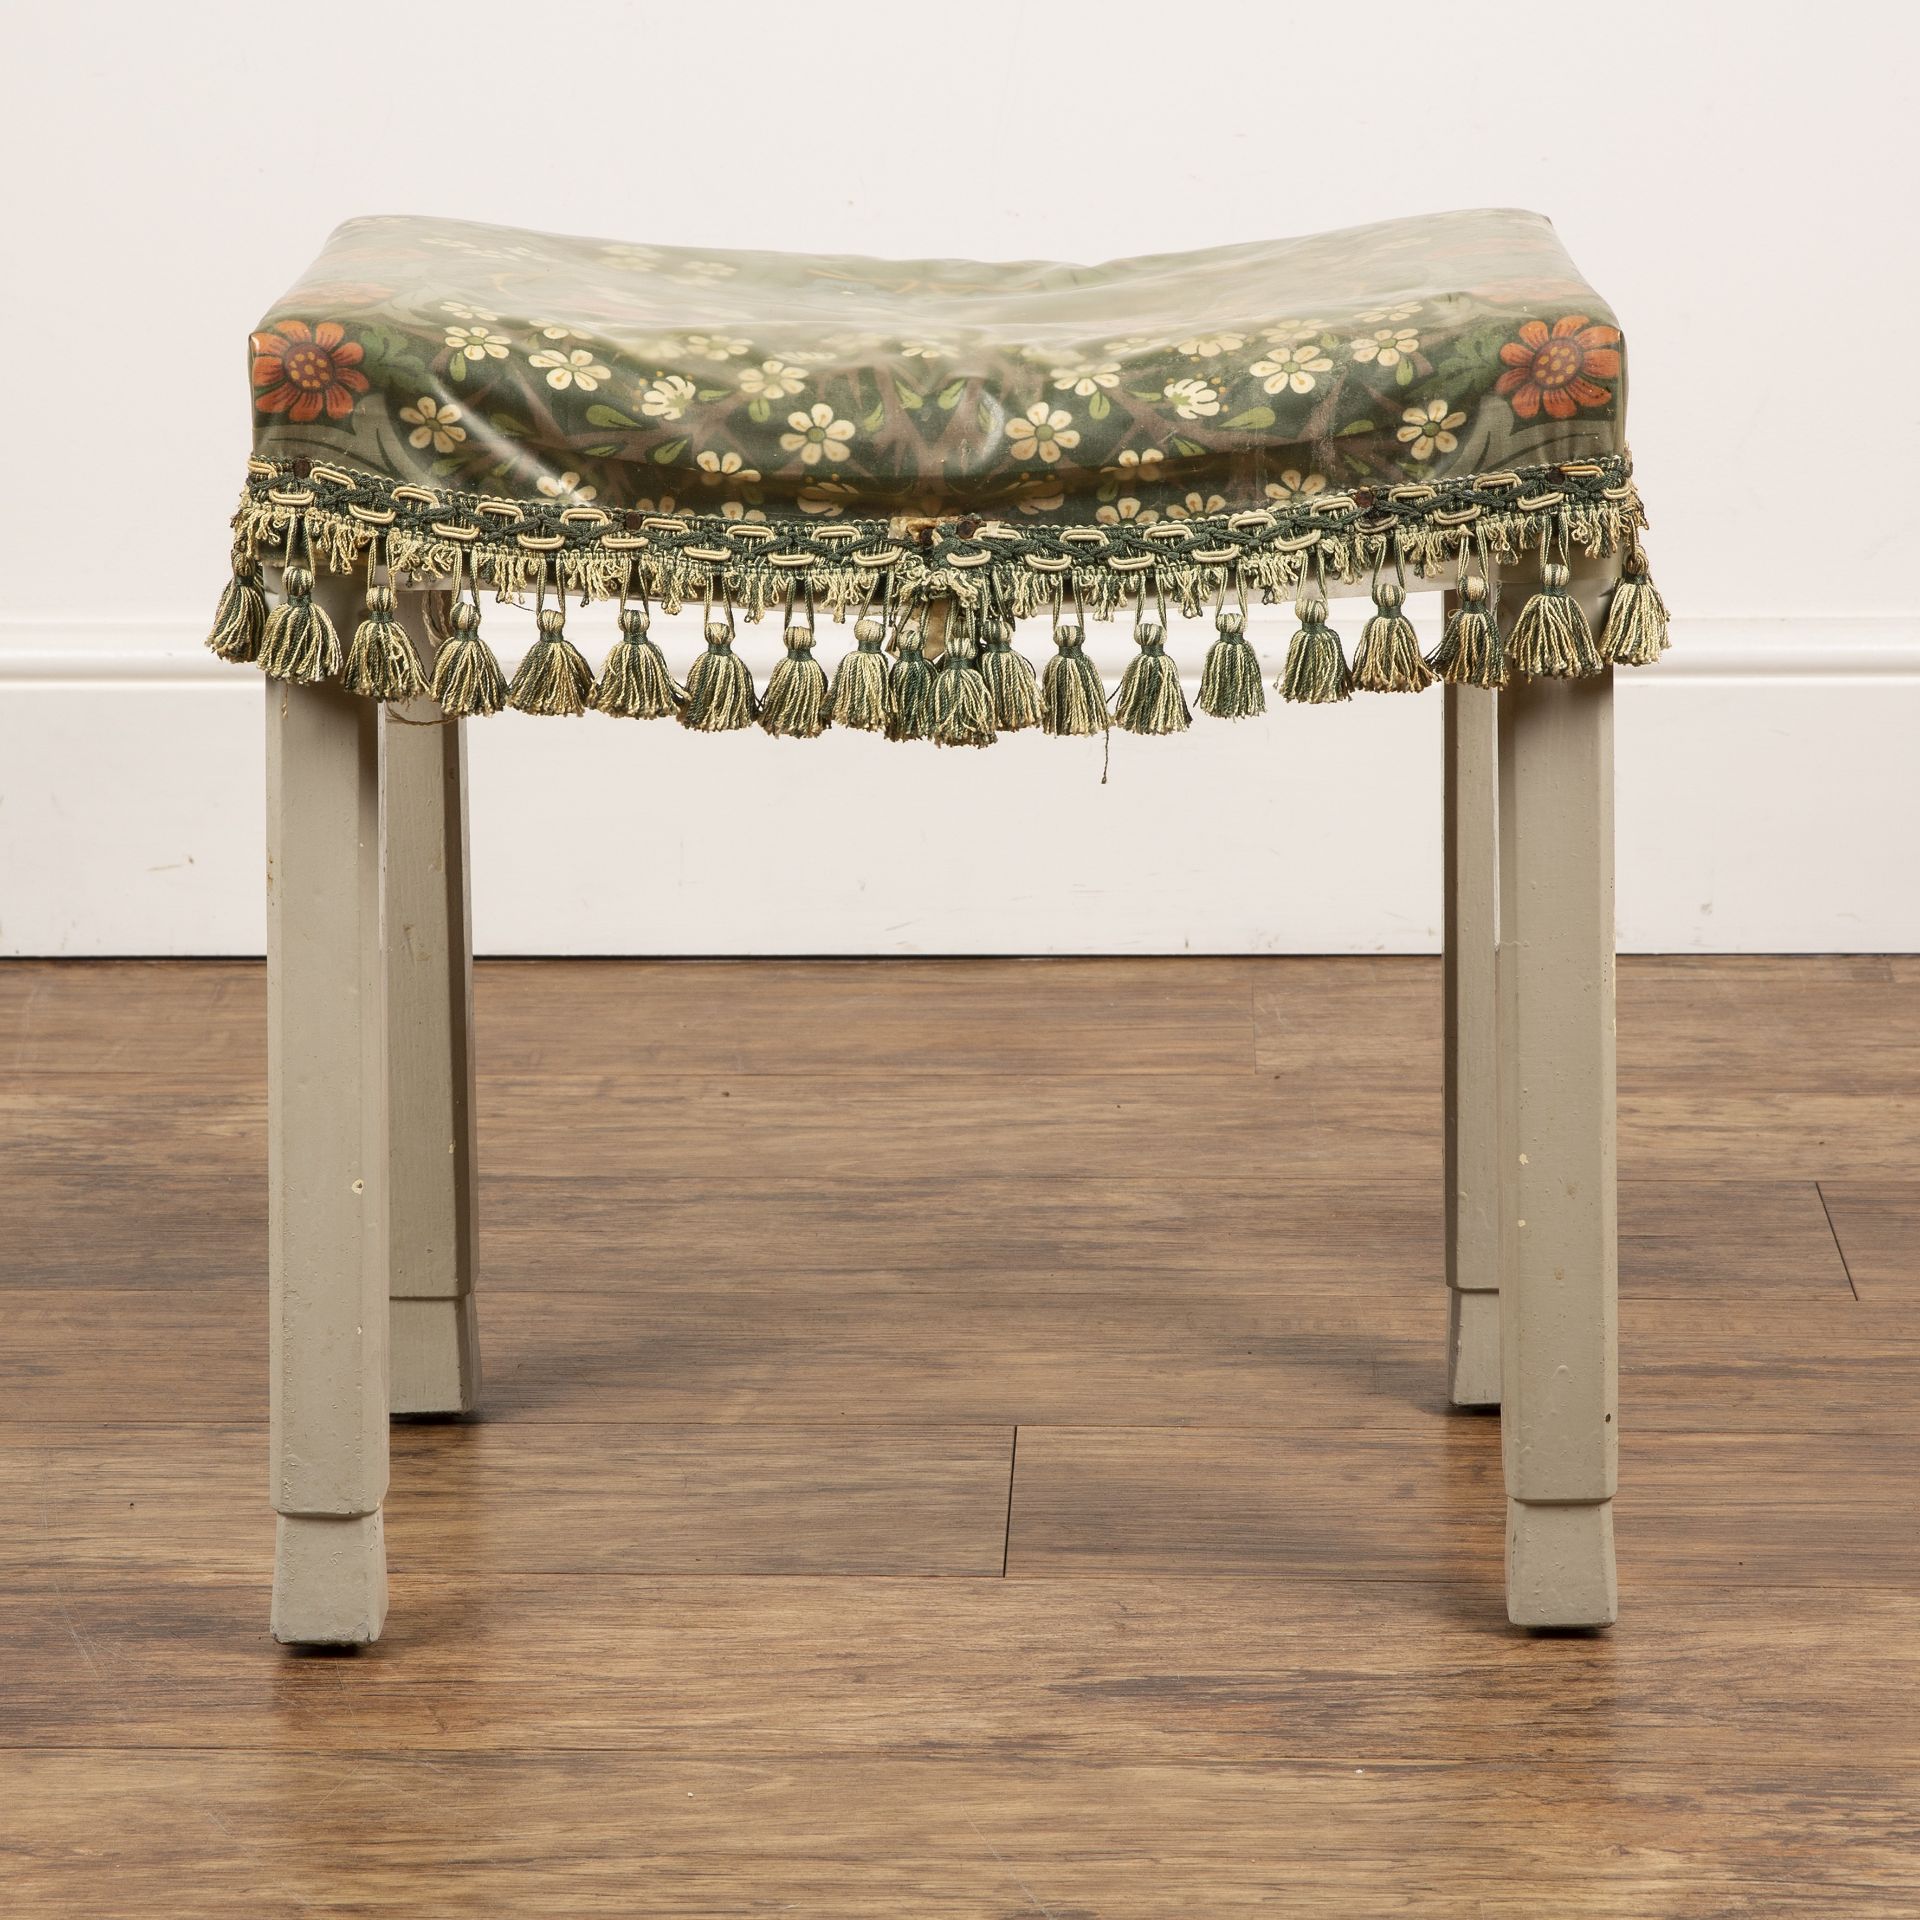 George VI Coronation stool 1937, obscured stamp underneath, has been painted and recovered with - Image 5 of 6